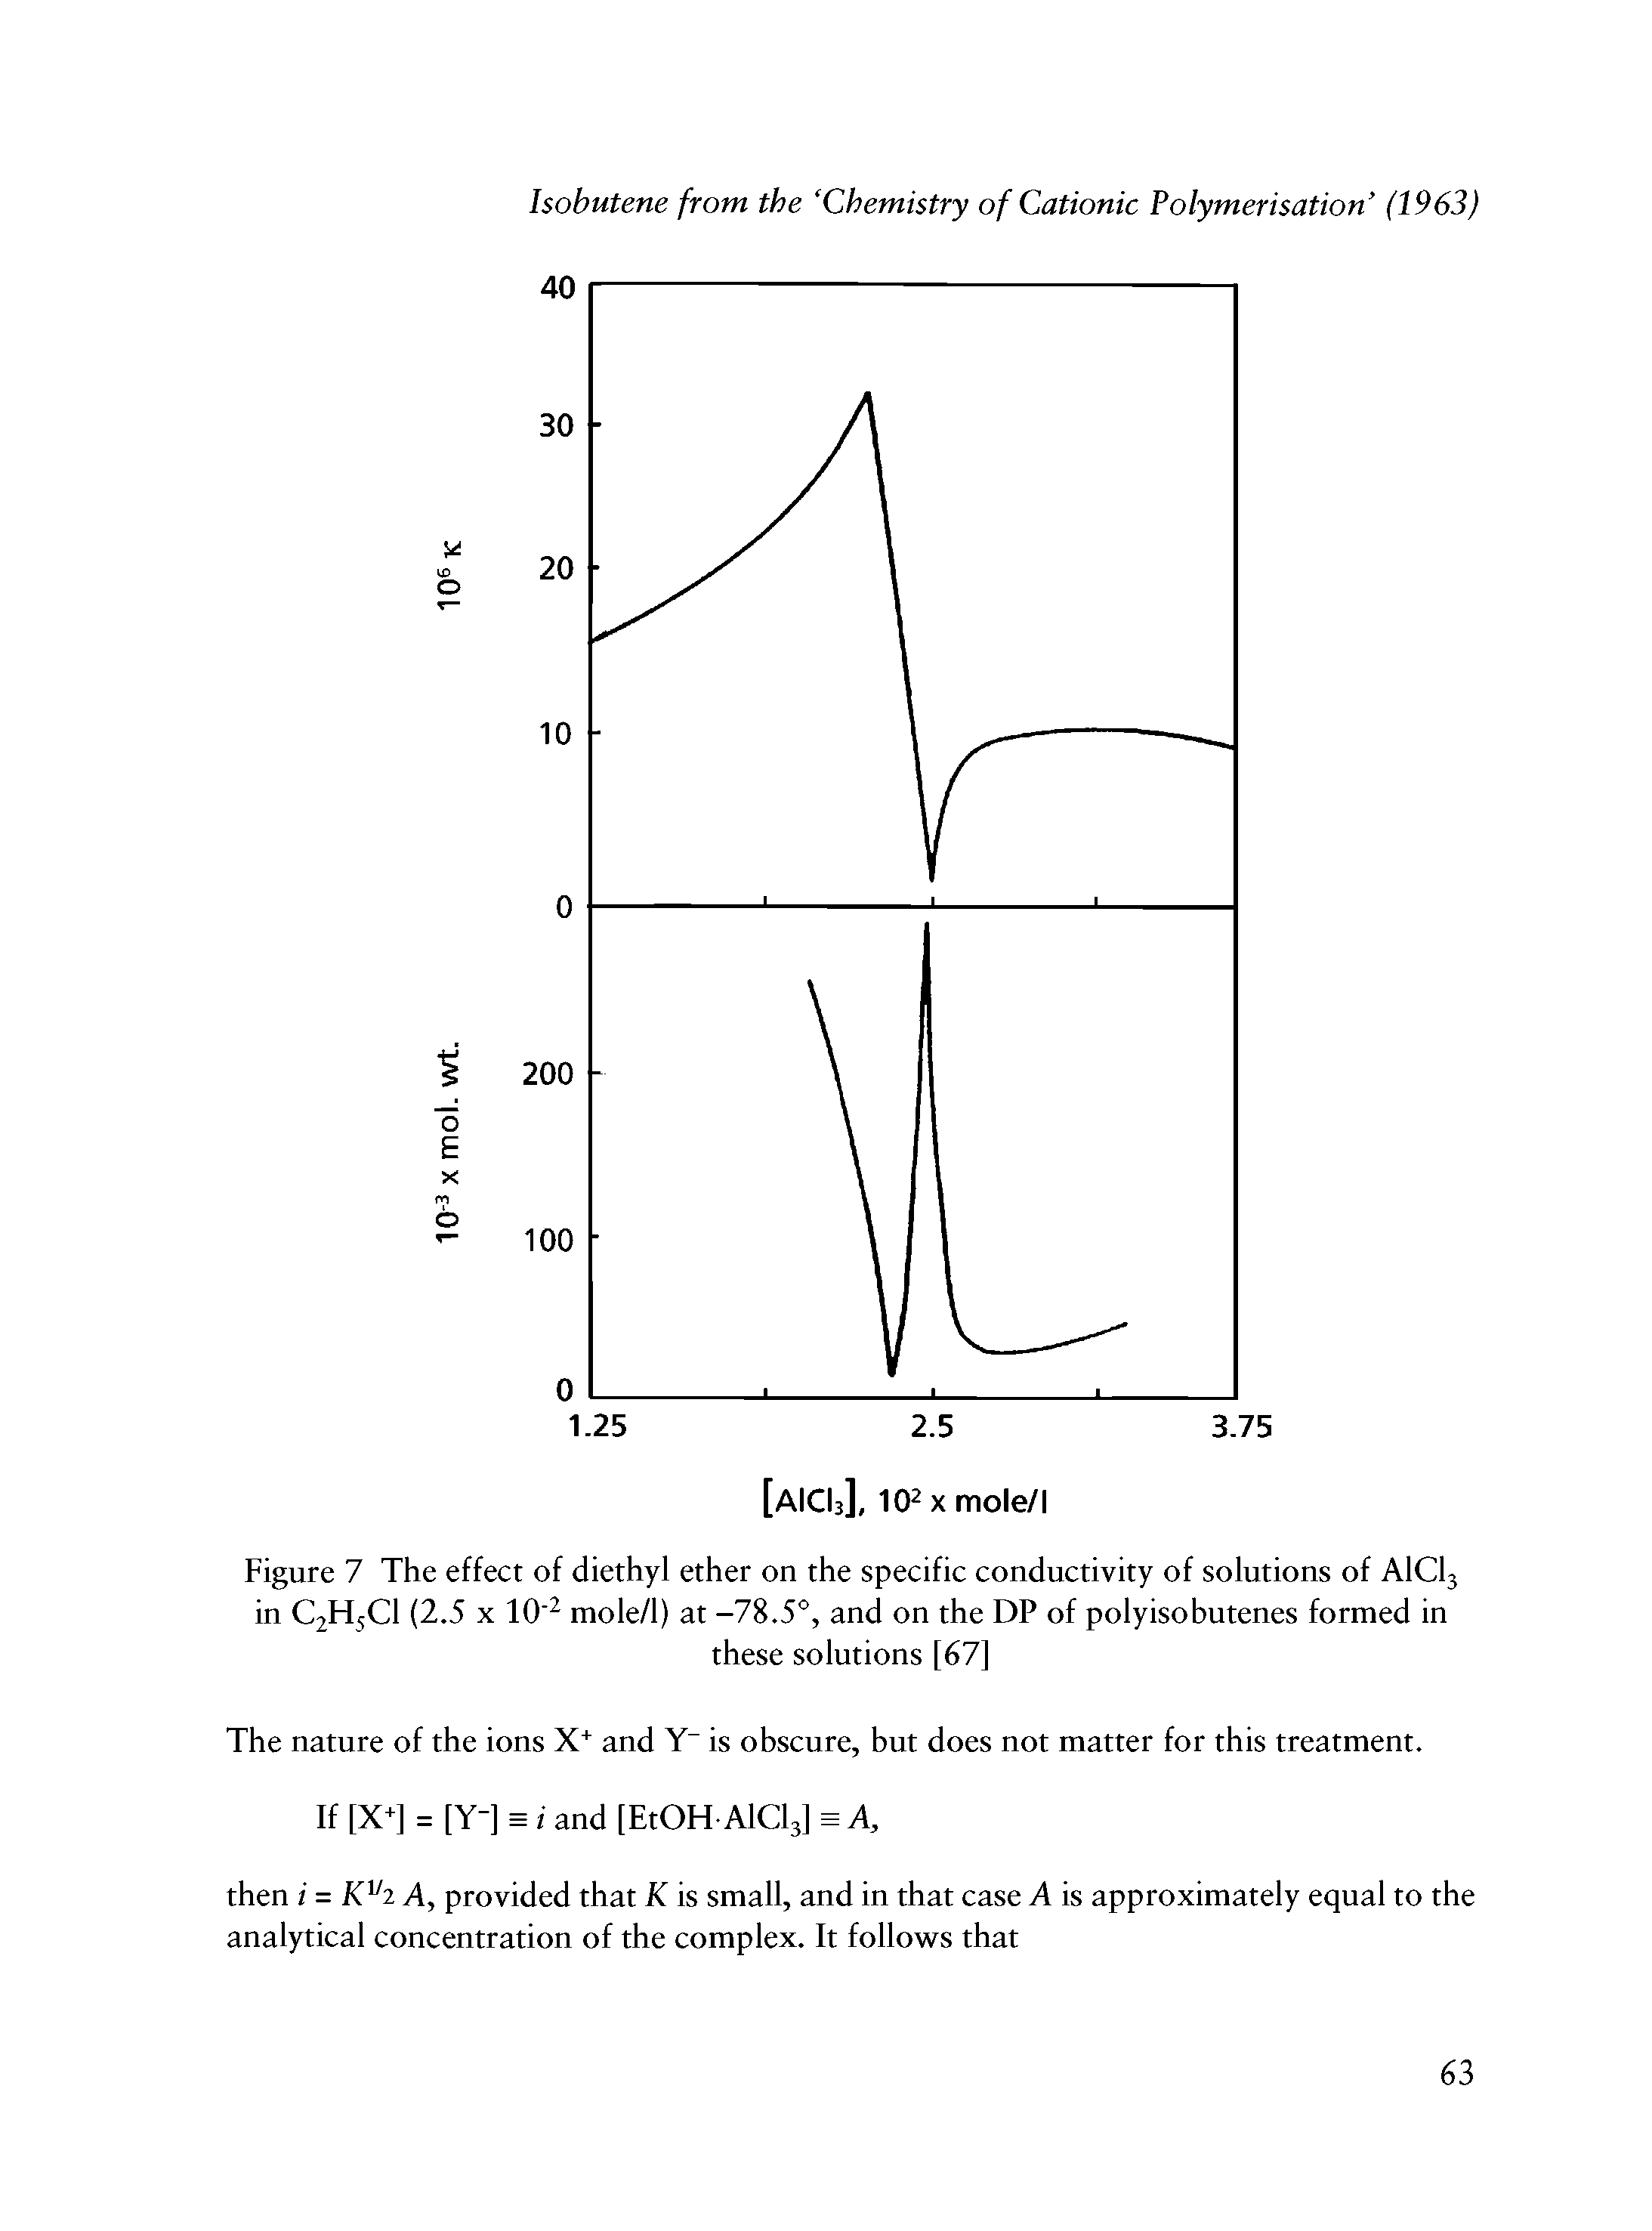 Figure 7 The effect of diethyl ether on the specific conductivity of solutions of AlCl3 in C2H5Cl (2.5 x 10"2 mole/l) at -78.5°, and on the DP of poly iso butenes formed in...